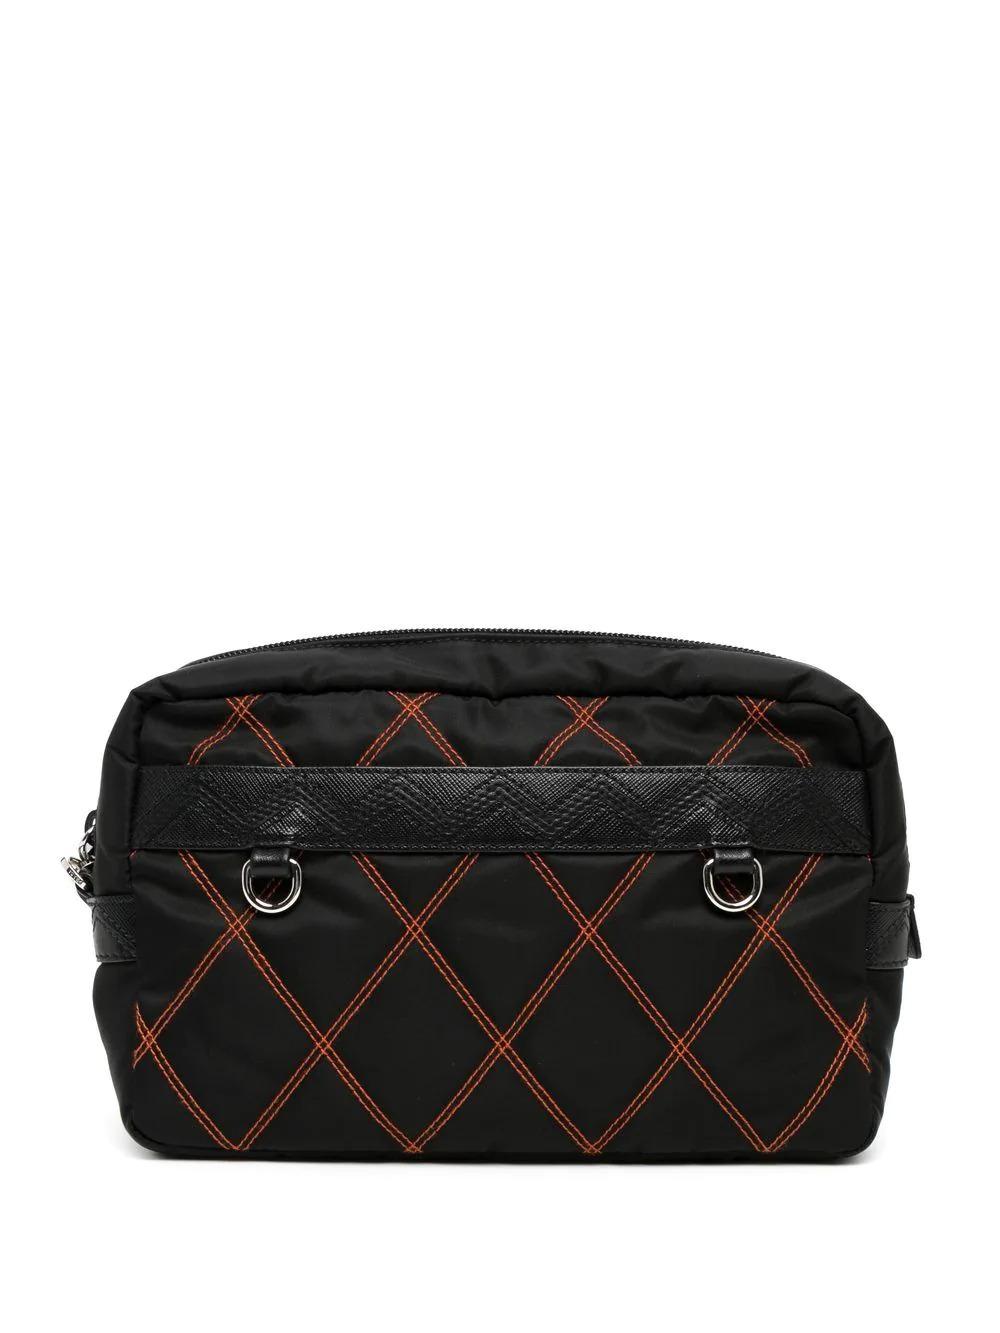 Perfectly sized to fit your makeup collection or for weekends away. This pre-owned Prada cosmetic pouch has been designed from black nylon and features an orange quilted stitch design and black Saffiano leather trim. Designed with a zip pocket, you